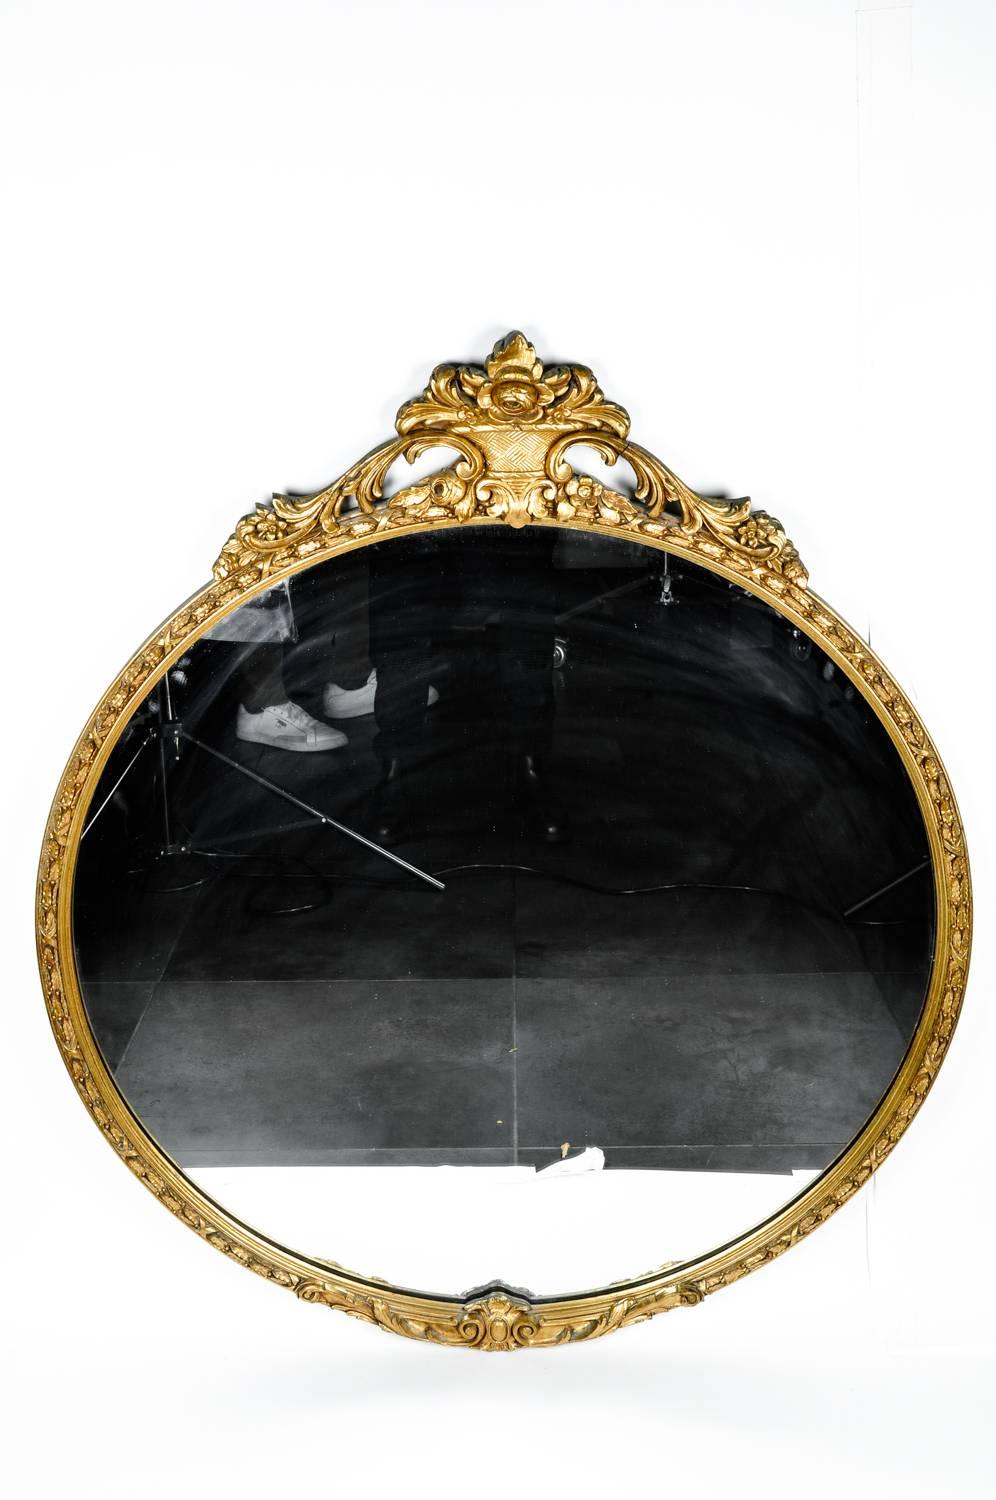 Antique giltwood frame mantel / fireplace hanging wall mirror. In excellent condition. The hanging mirror measure 44.5 inches in diameter.